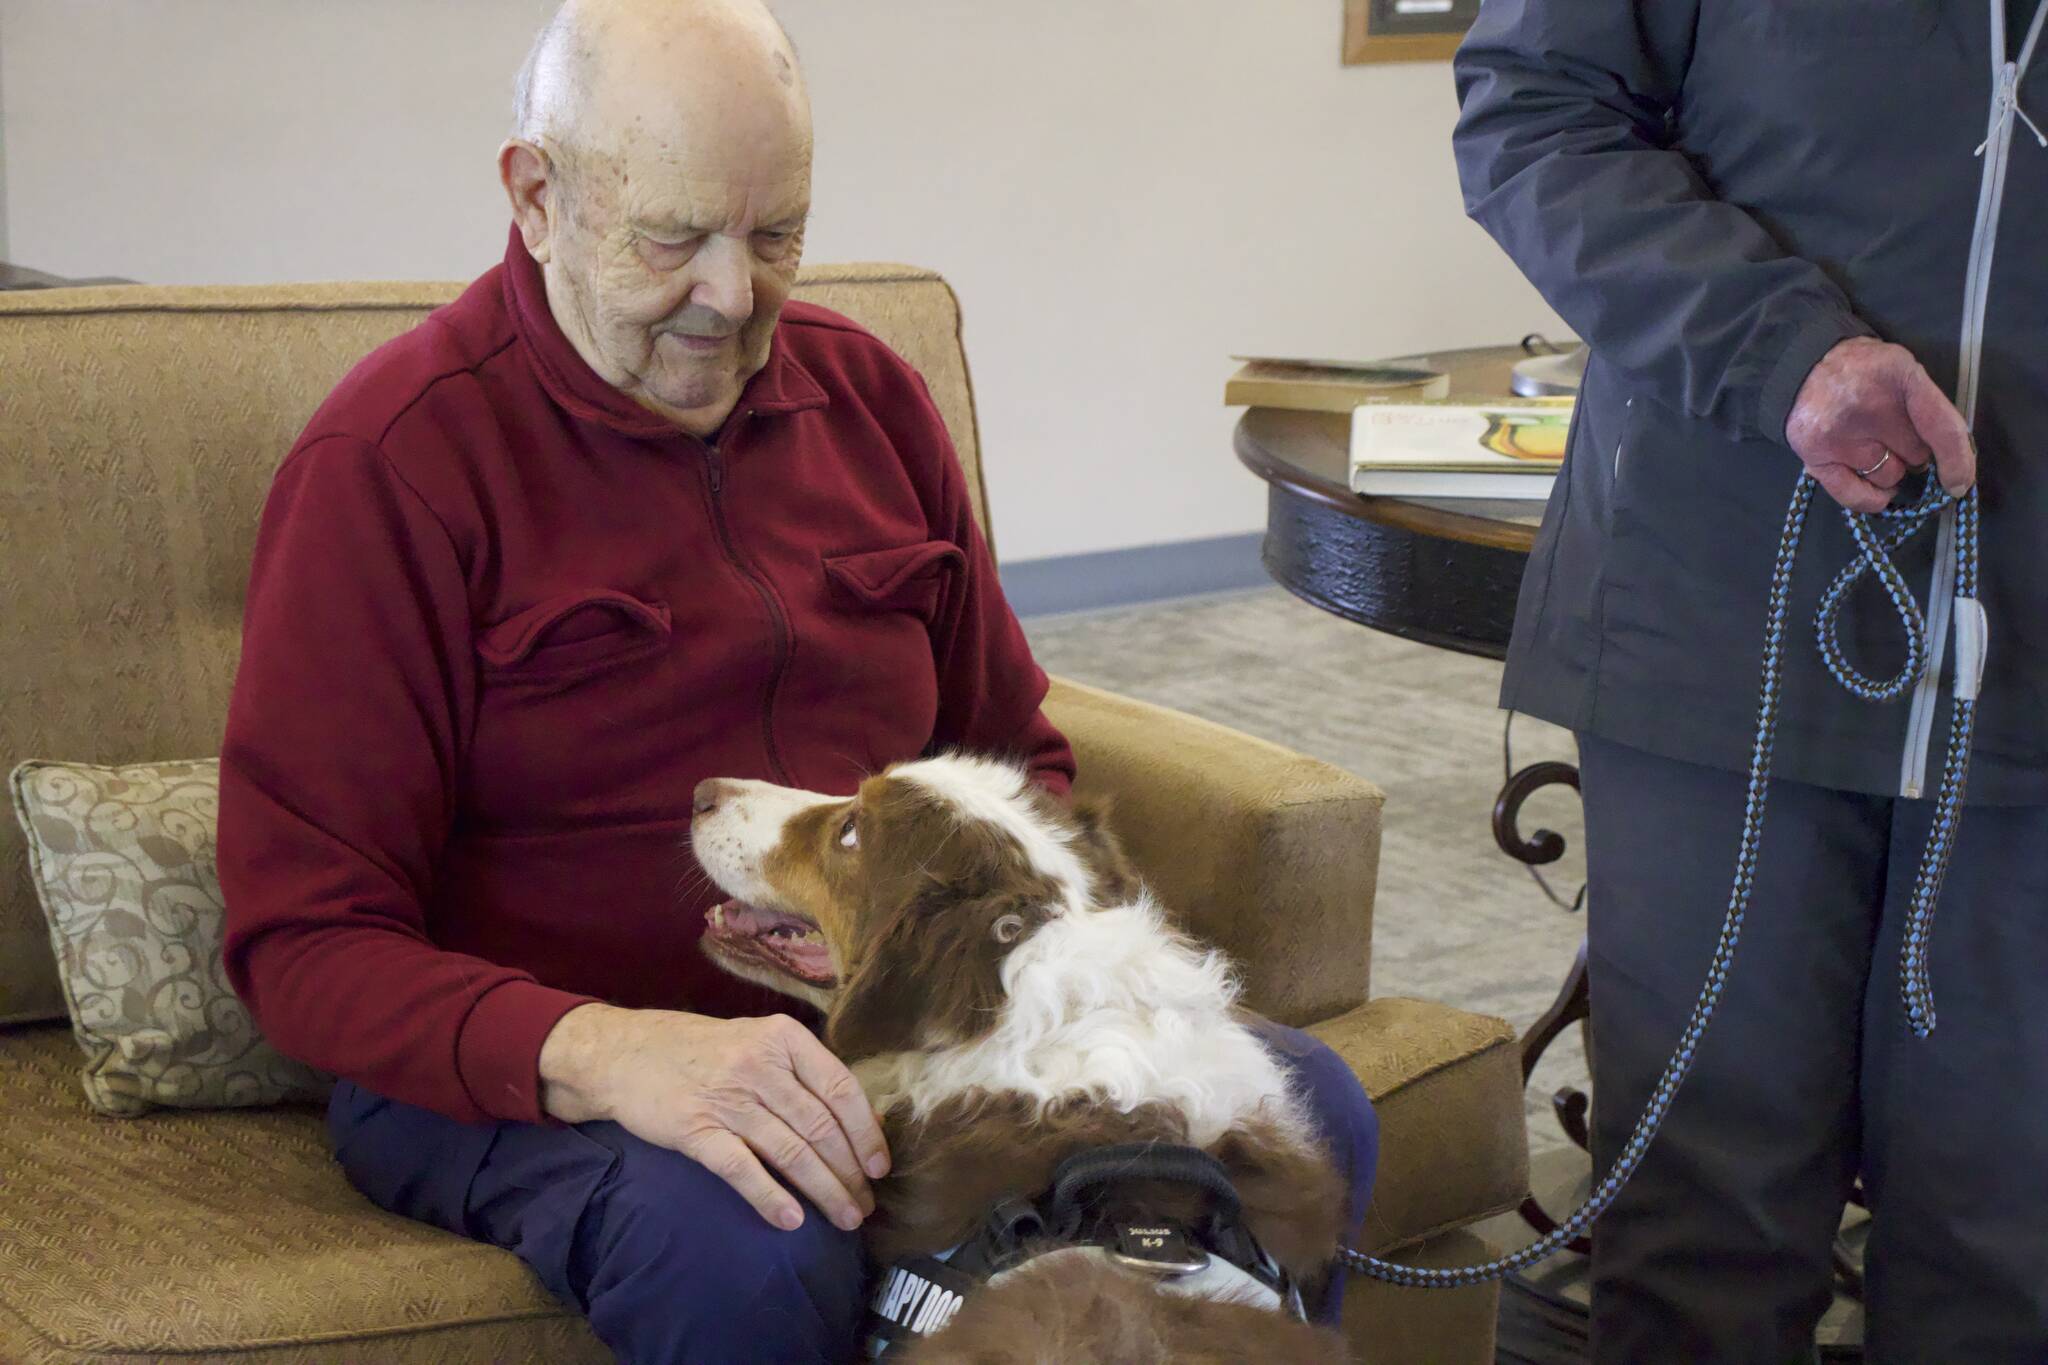 Art Mittlieder, a resident at Harbor Tower Village, spends time with a therapy dog named Dillon.